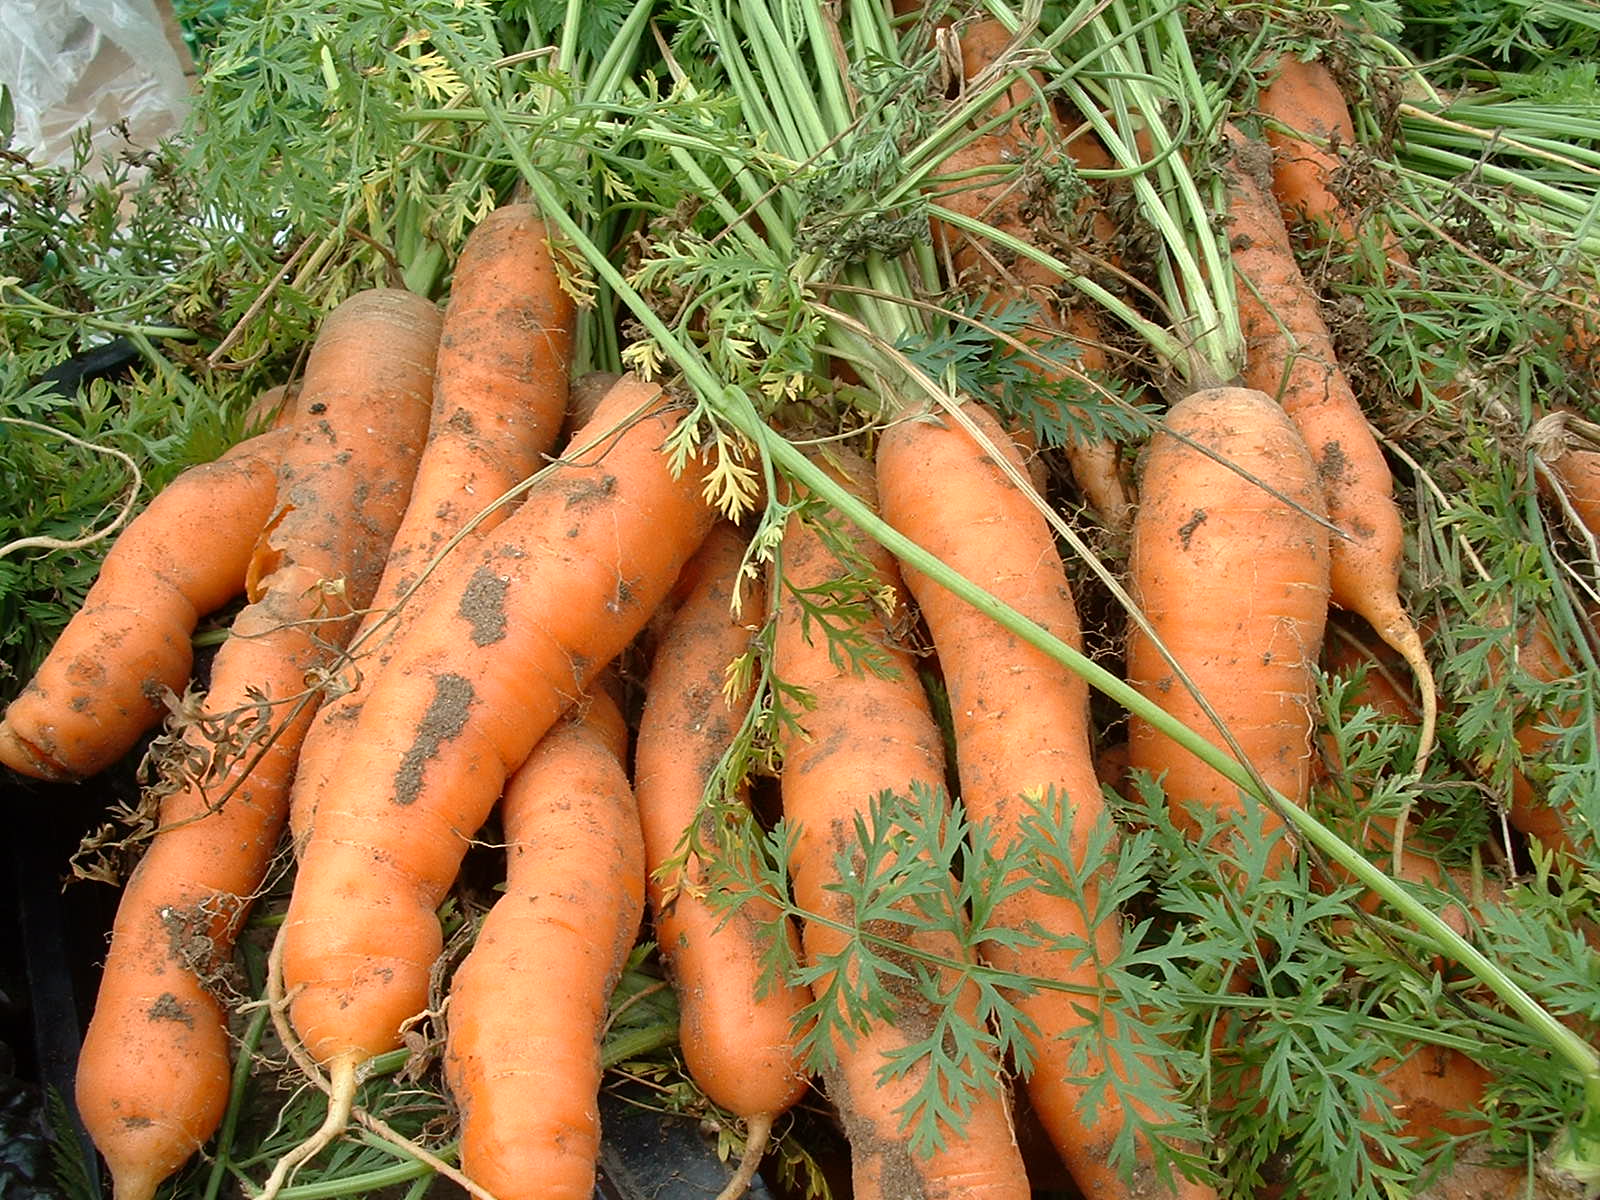 there is a large bunch of carrots that are in the bush